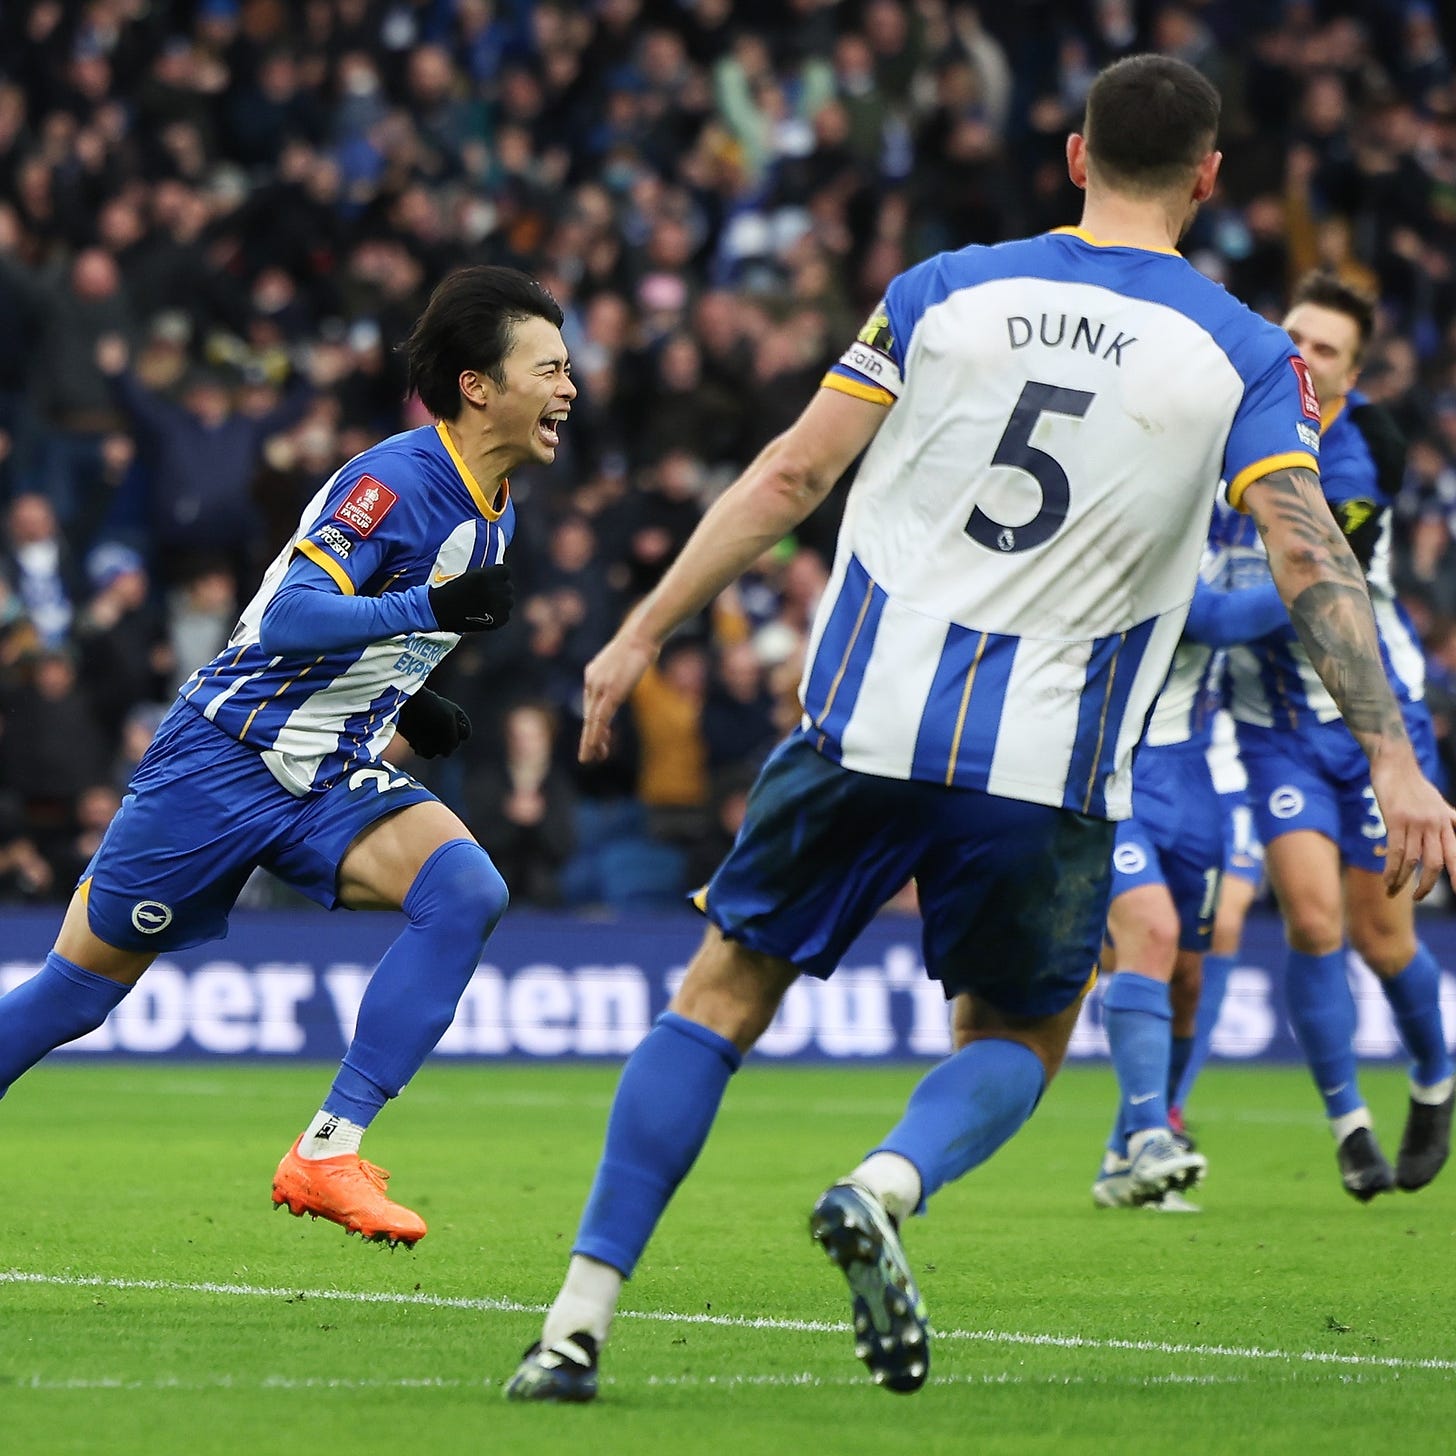 Kaoru celebrates his winner against Liverpool with Dunky in the foreground and Alexis and Joel hugging each other in the background. What. A. Moment.